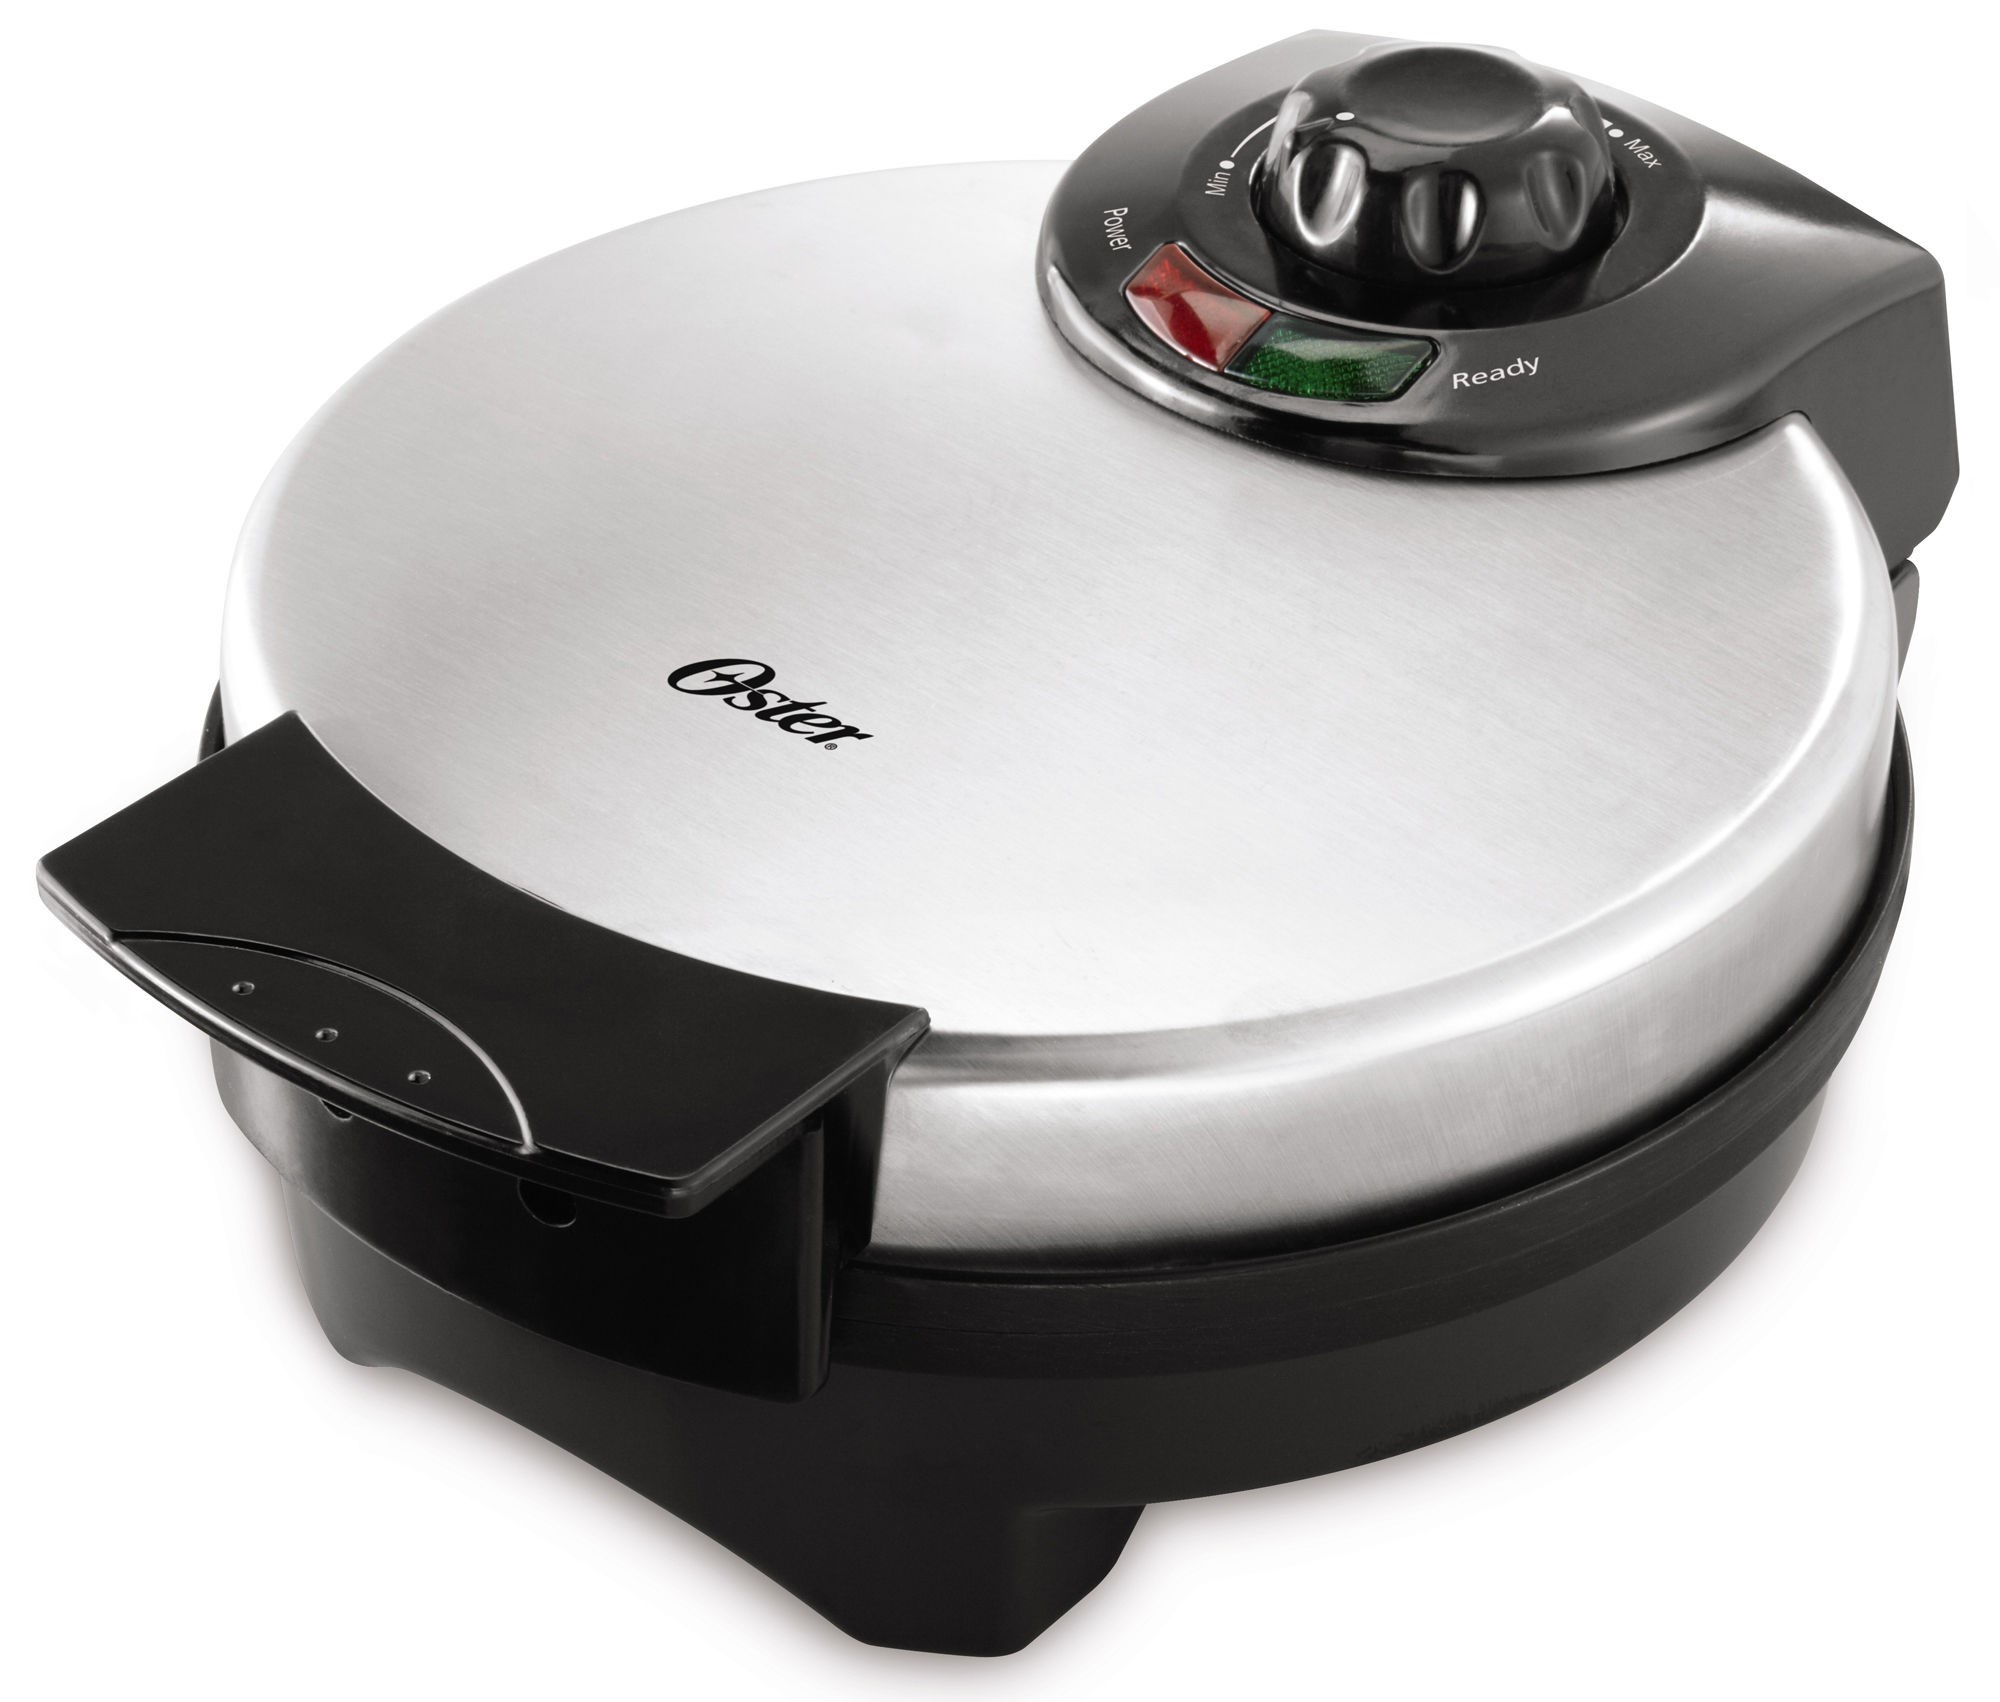 Oster 8" Nonstick Belgian Waffle Maker with Temperature Control, Silver - image 1 of 5